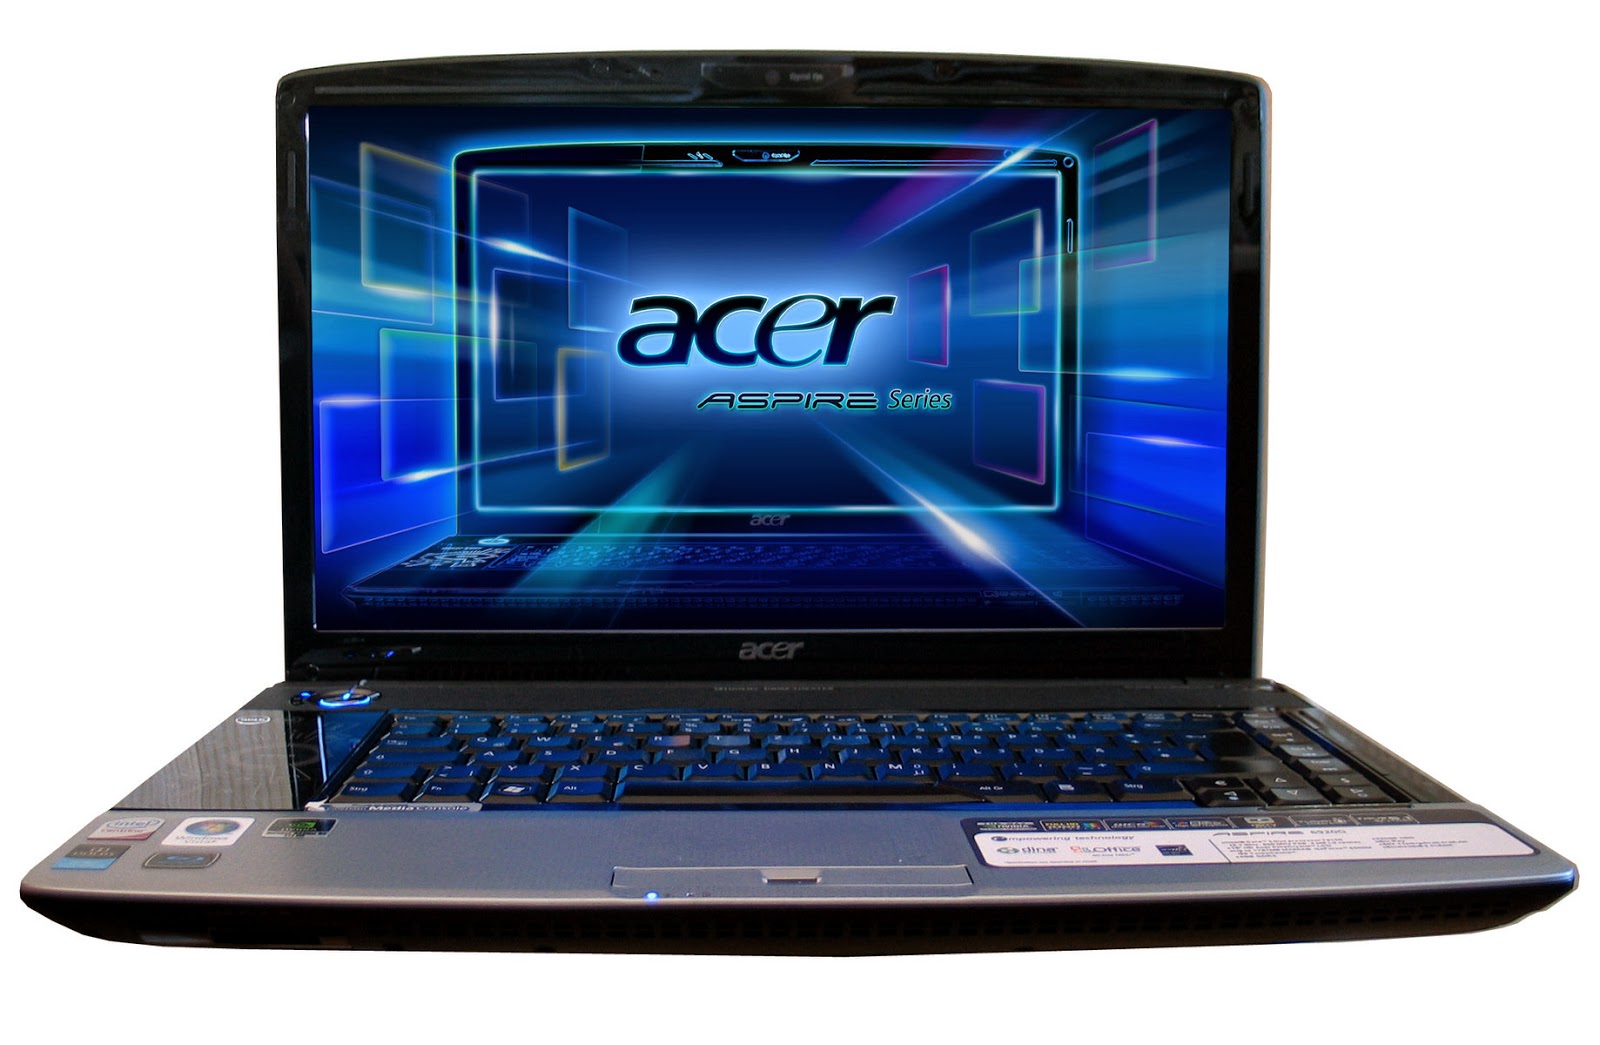 acer aspire 4930 drivers for windows xp free download